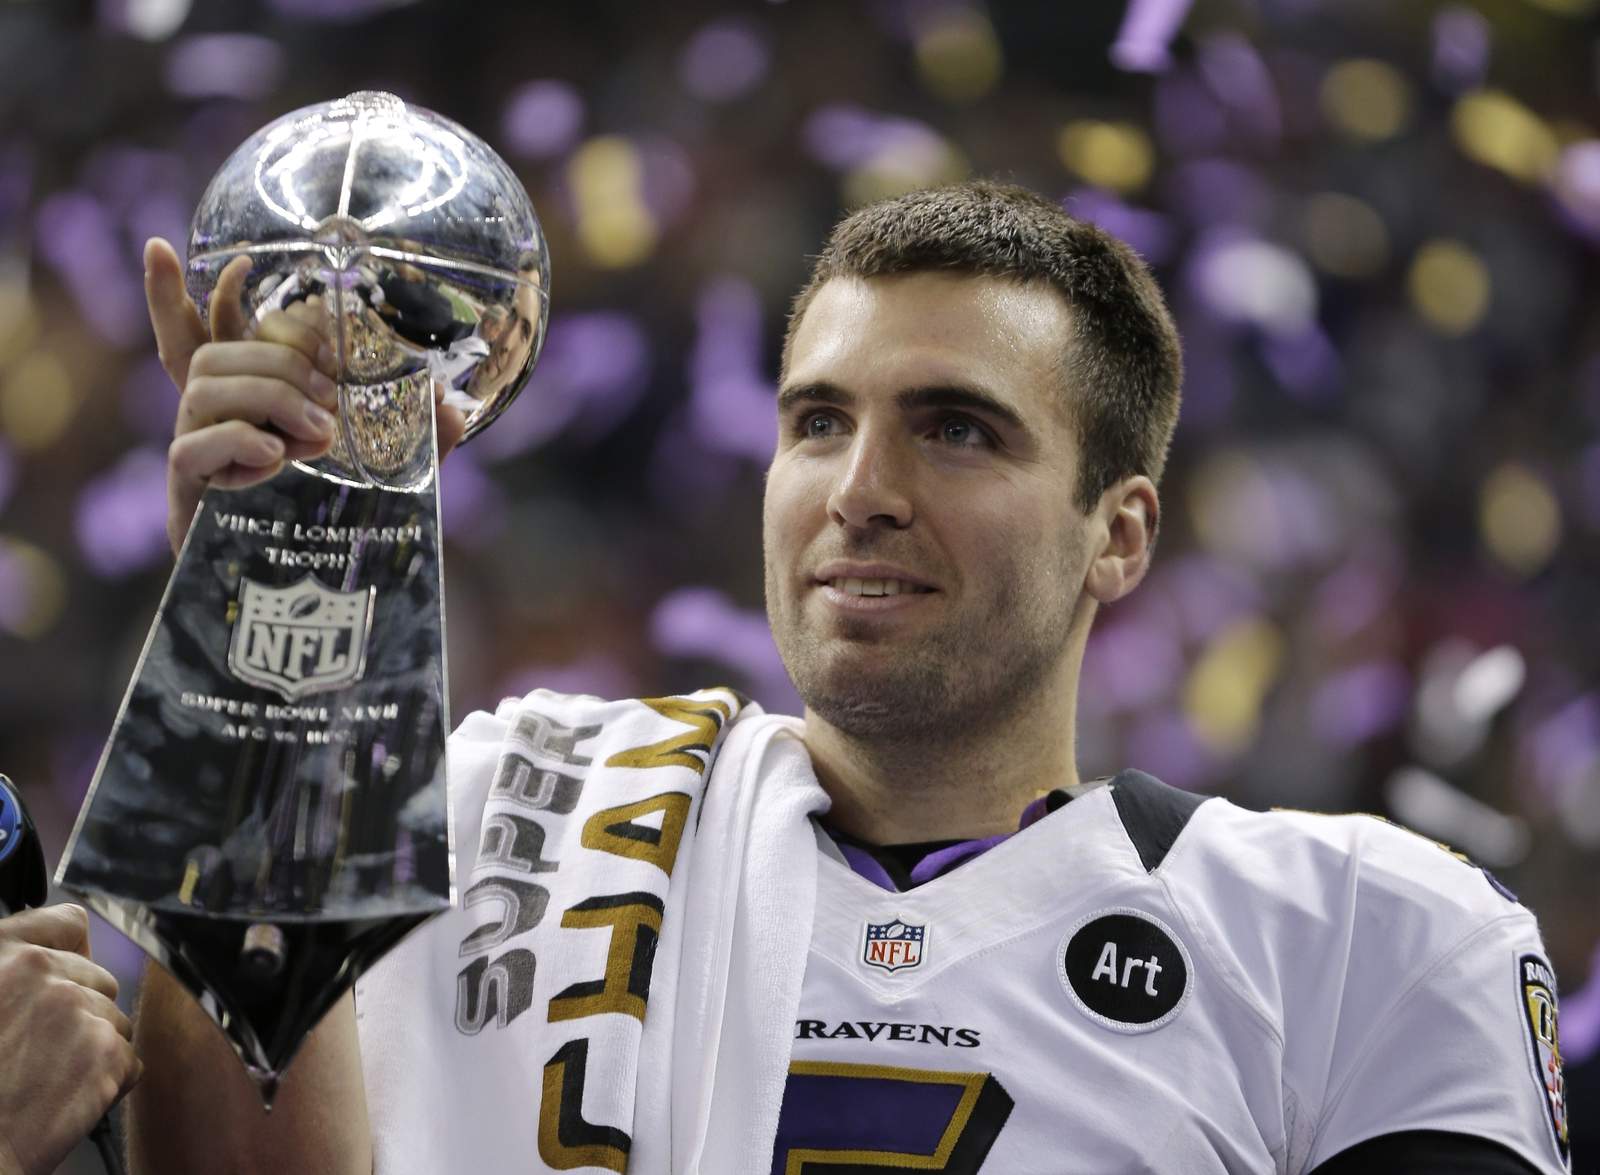 Jets' Flacco 'embracing' backup role but not done as starter